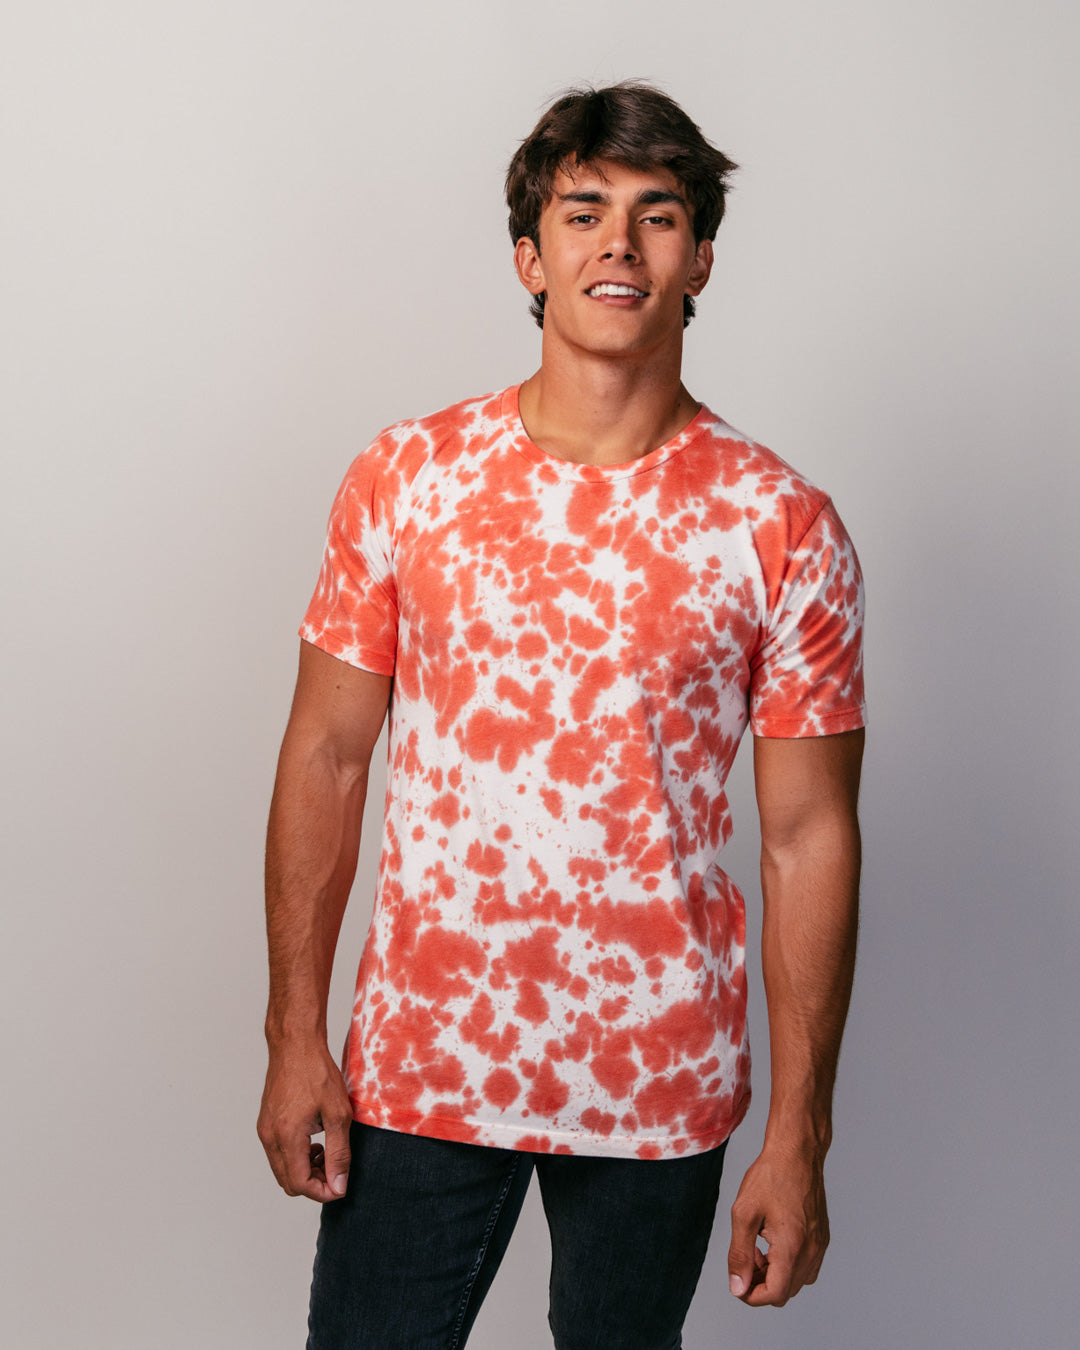 Red and White Tie Dye Vintage T-Shirt | Charlie Hustle 40 / XL